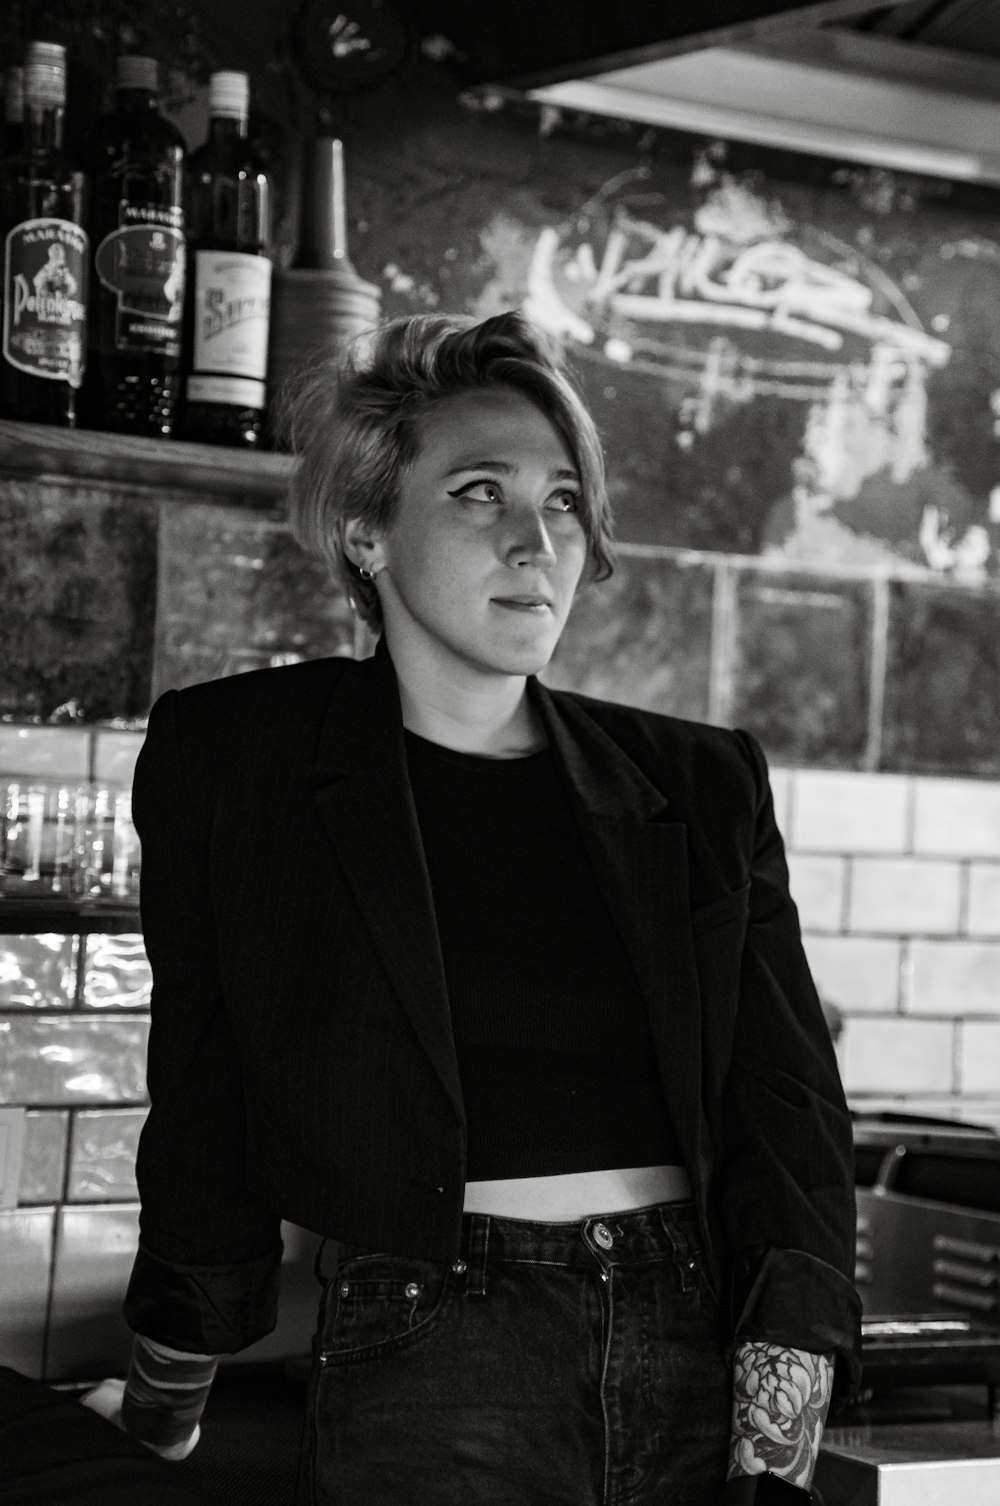 a black and white photo of a woman in a bar